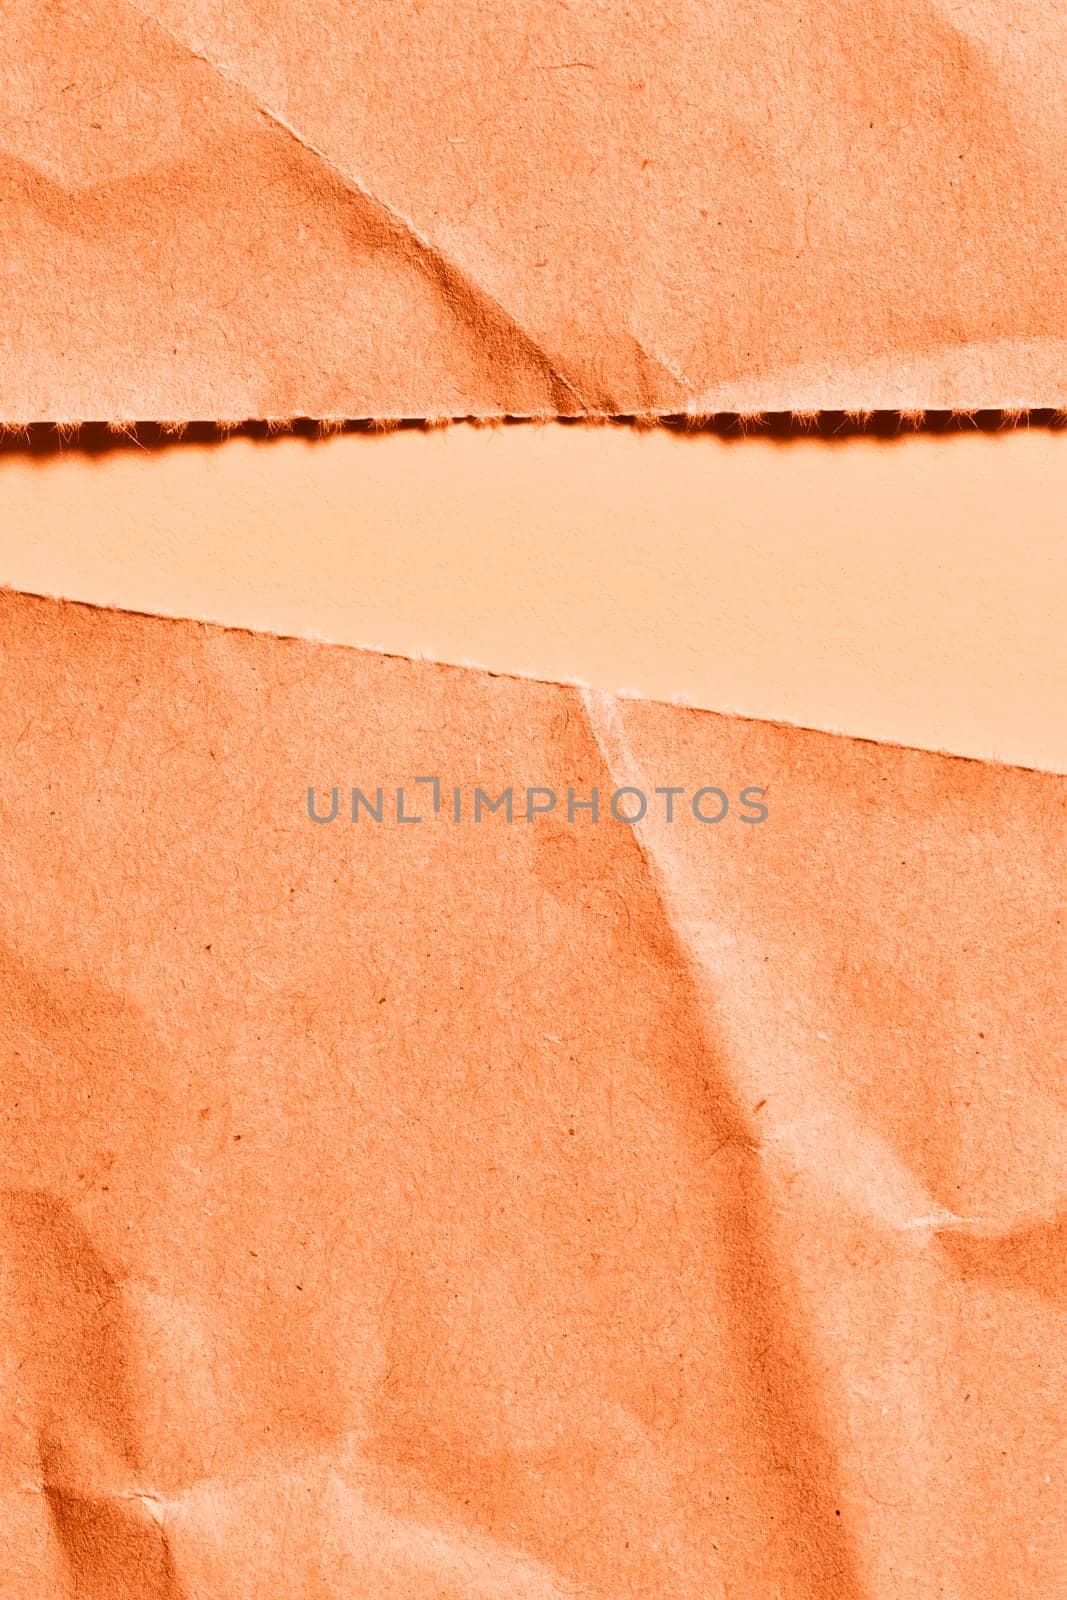 Abstract background with cut,  peach colored papers , decorative card